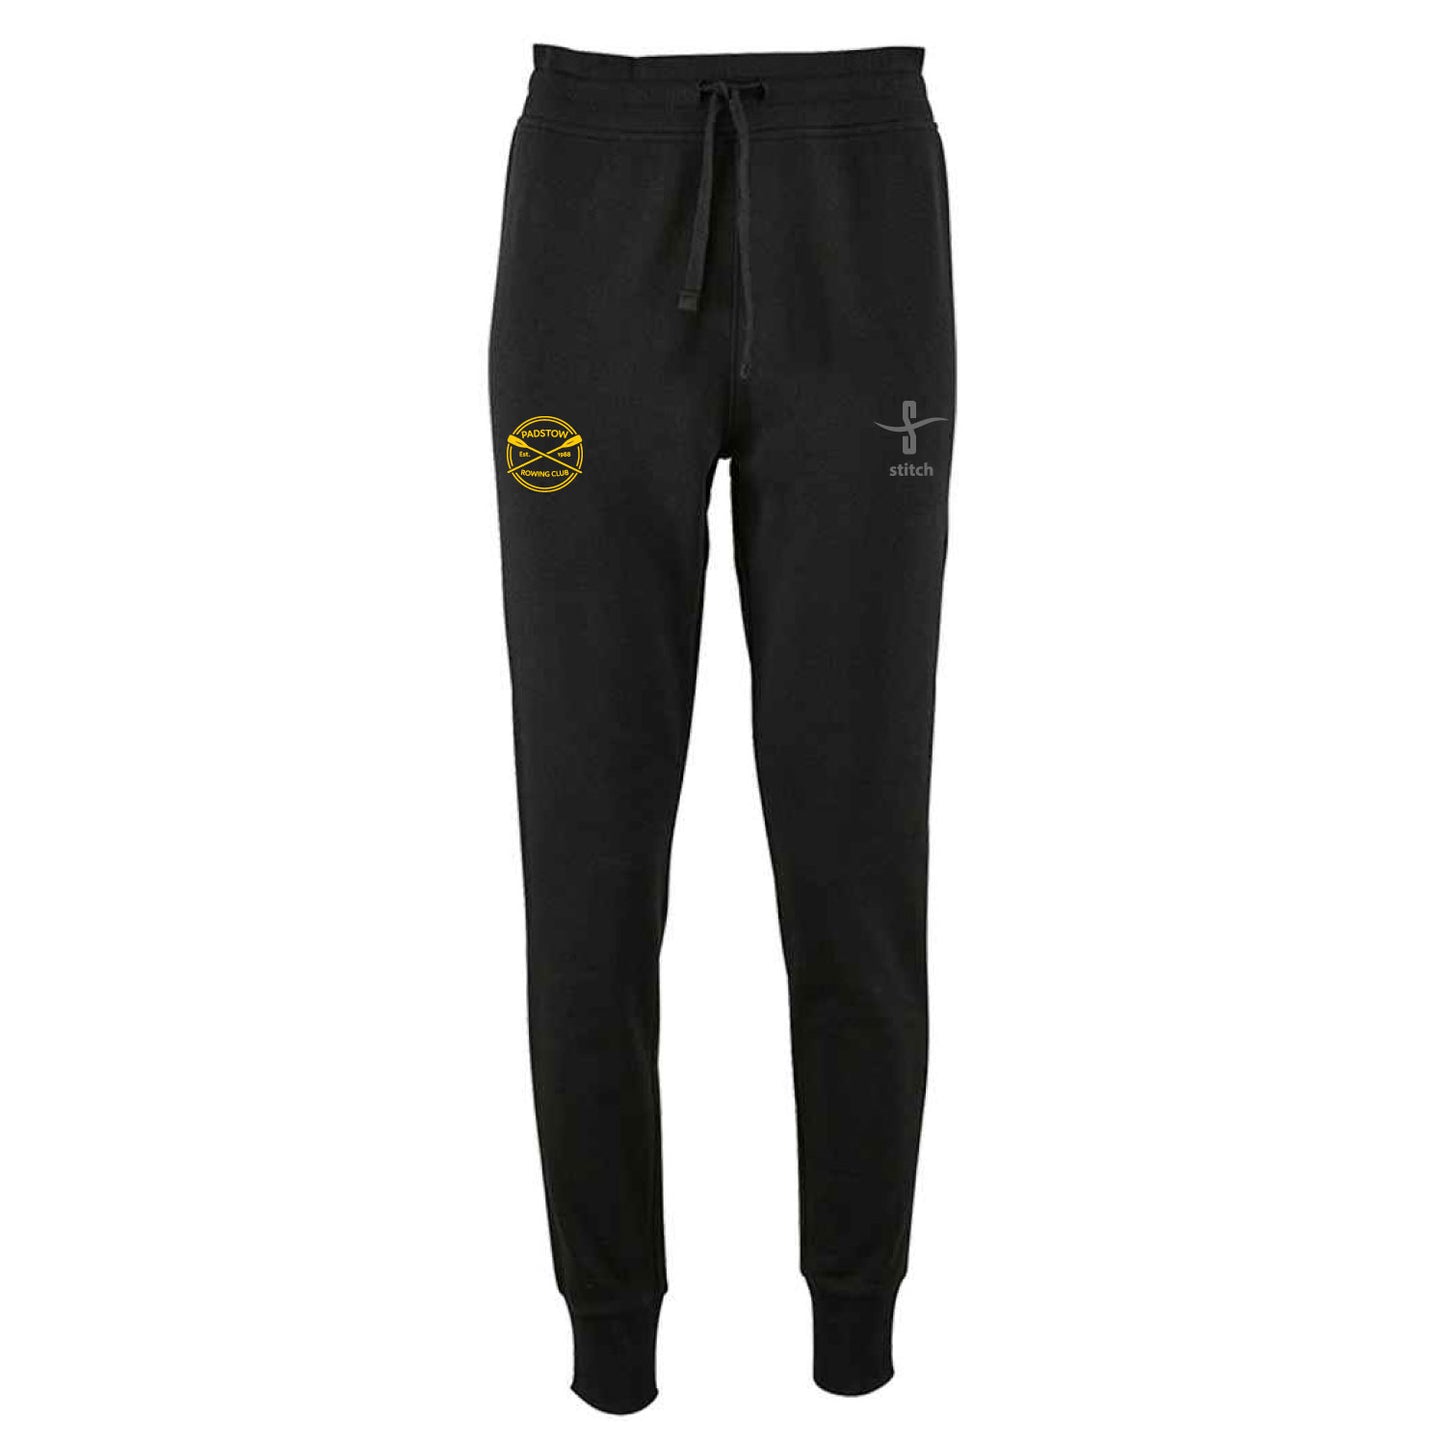 Padstow Rowing Club Jogging Bottoms